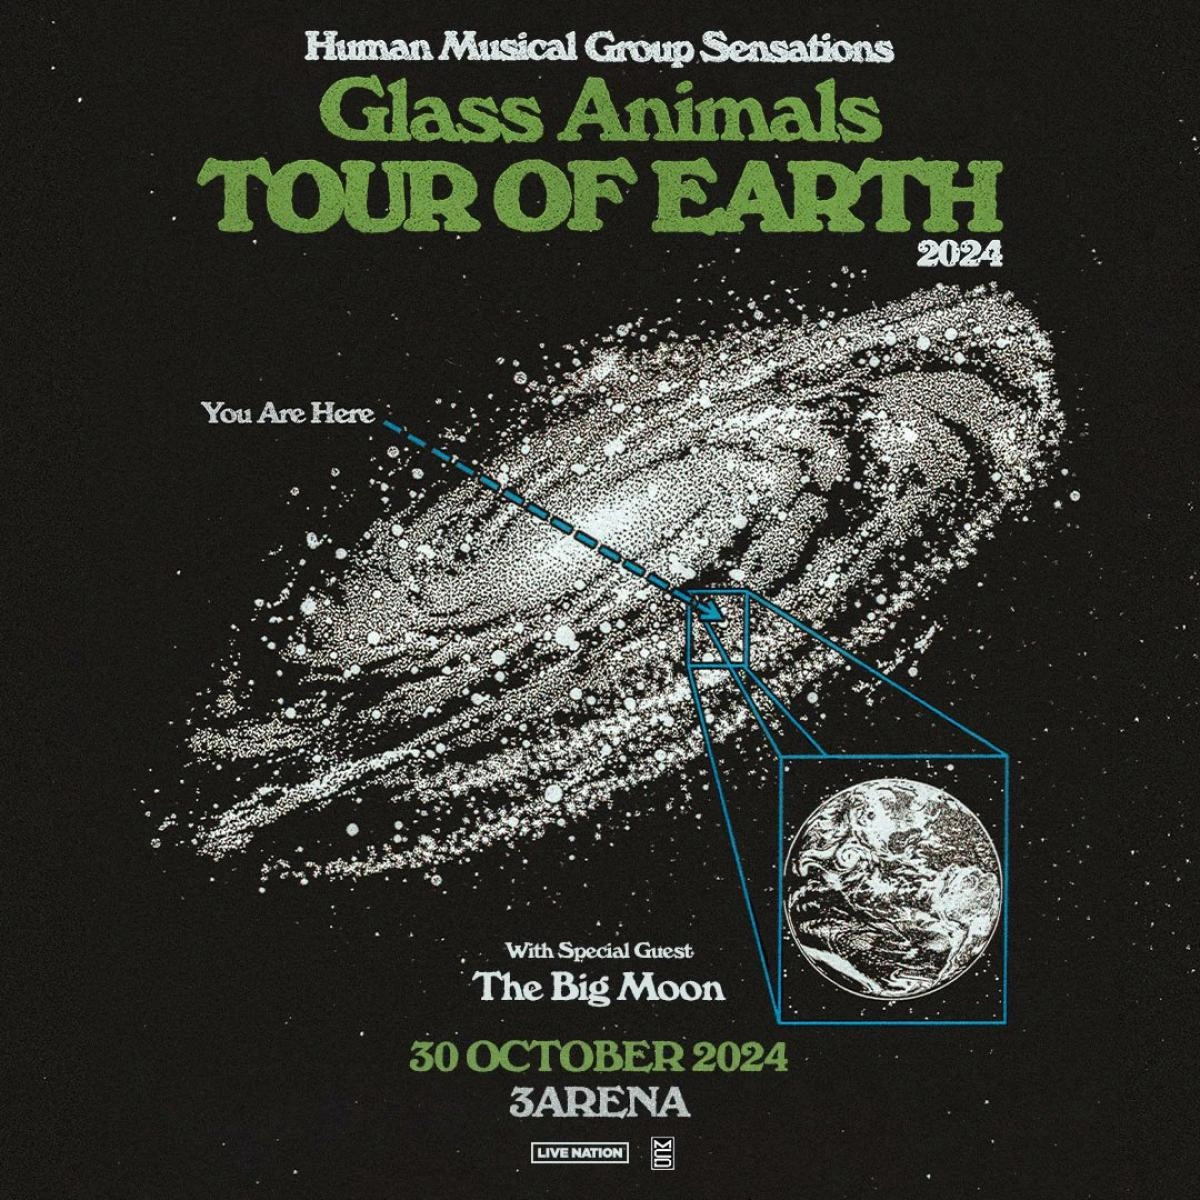 Glass Animals at 3Arena Dublin Tickets